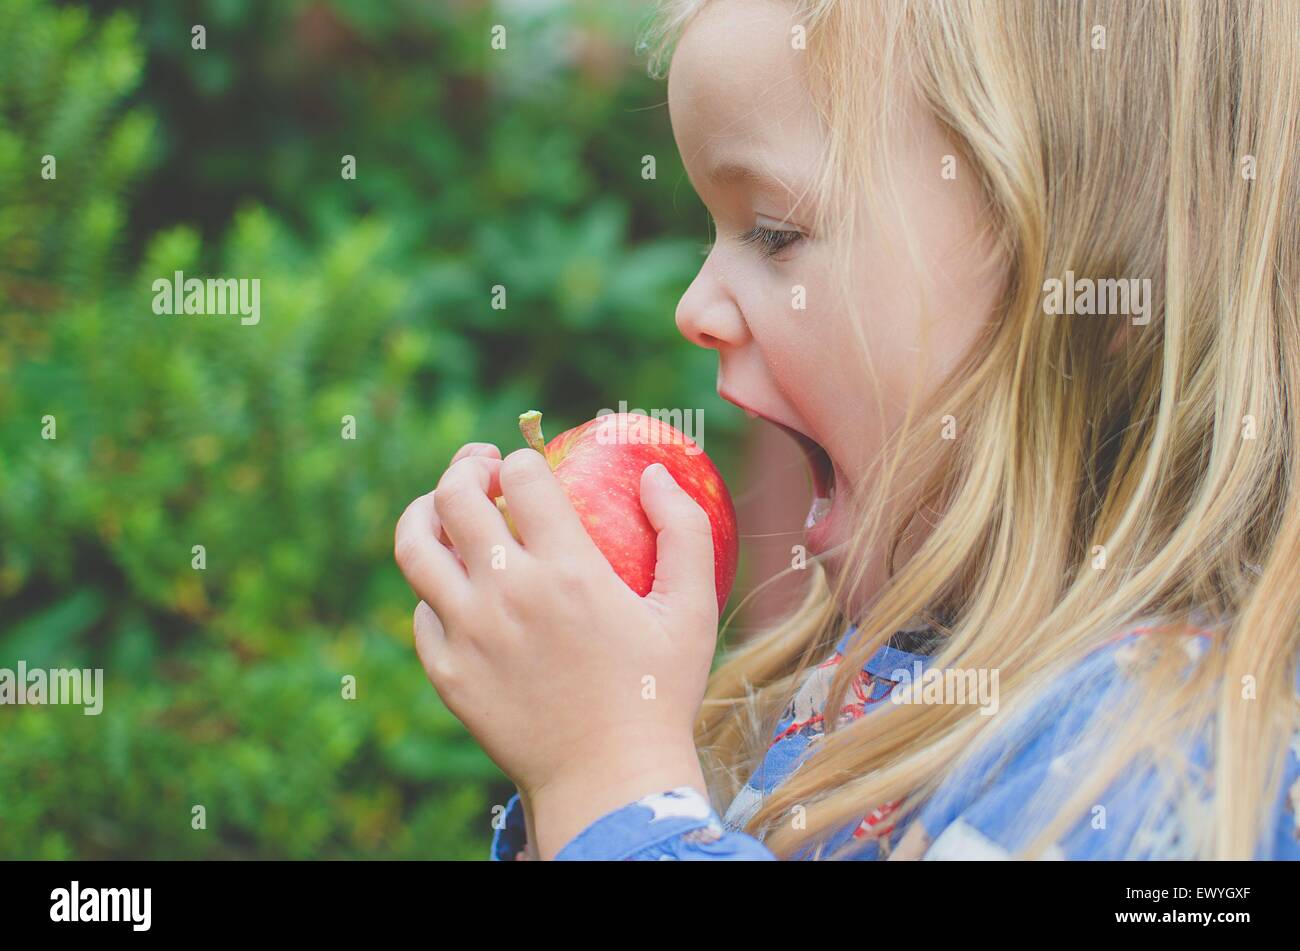 Side view of a girl about to take a bite out of an apple Stock Photo